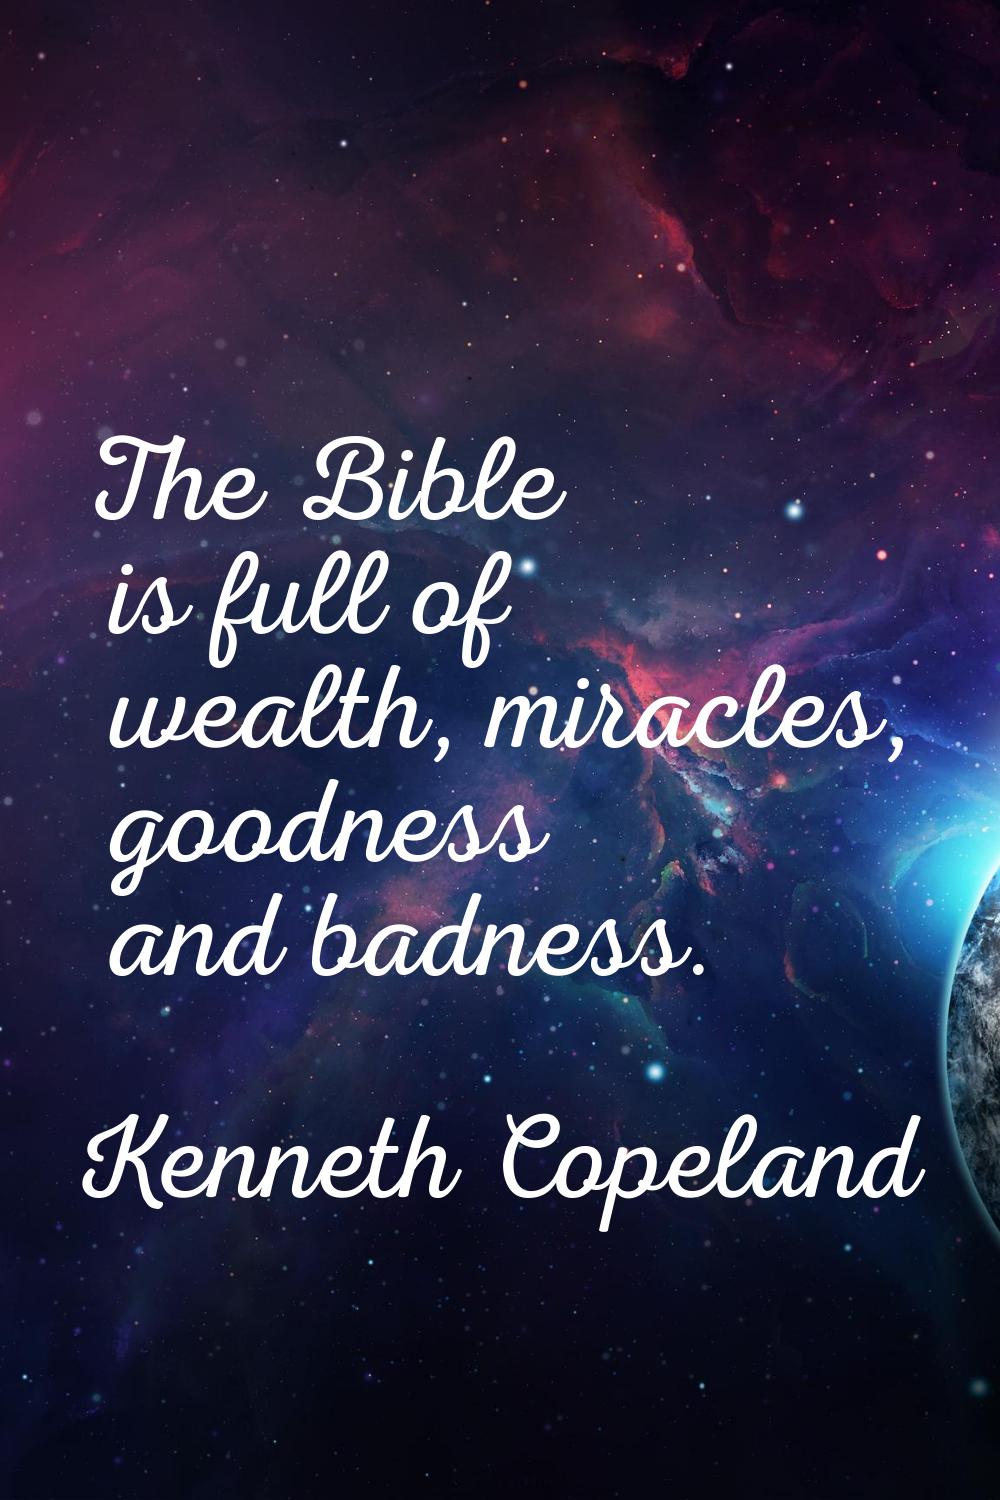 The Bible is full of wealth, miracles, goodness and badness.